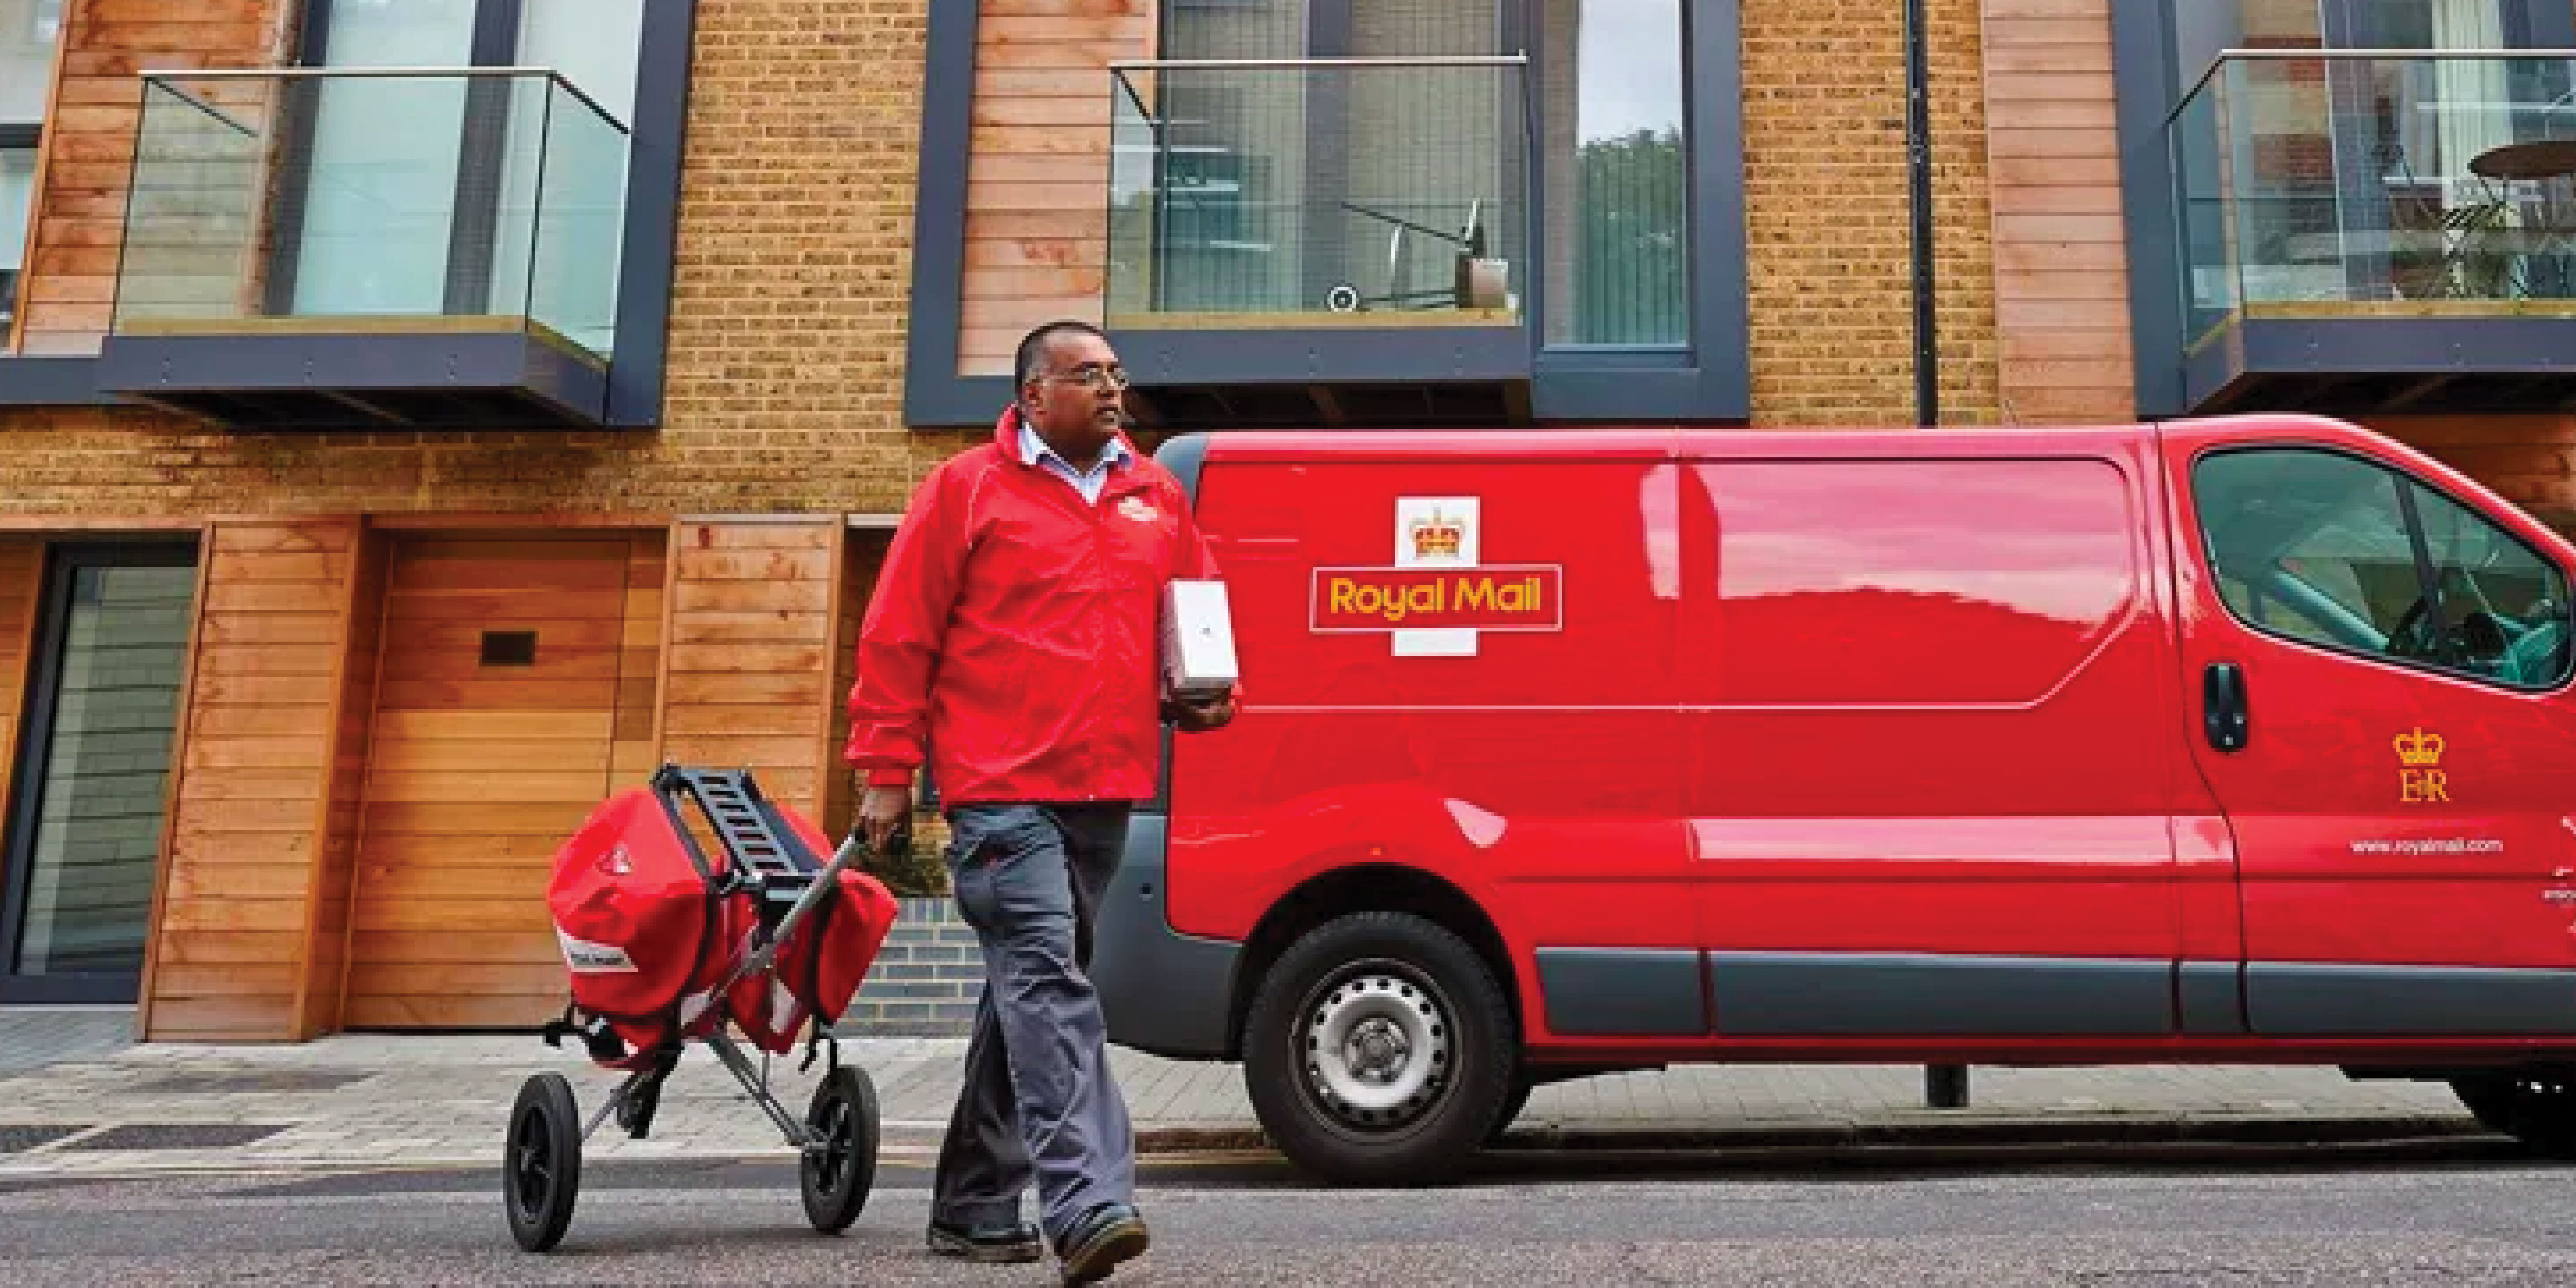 Royal Mail Images